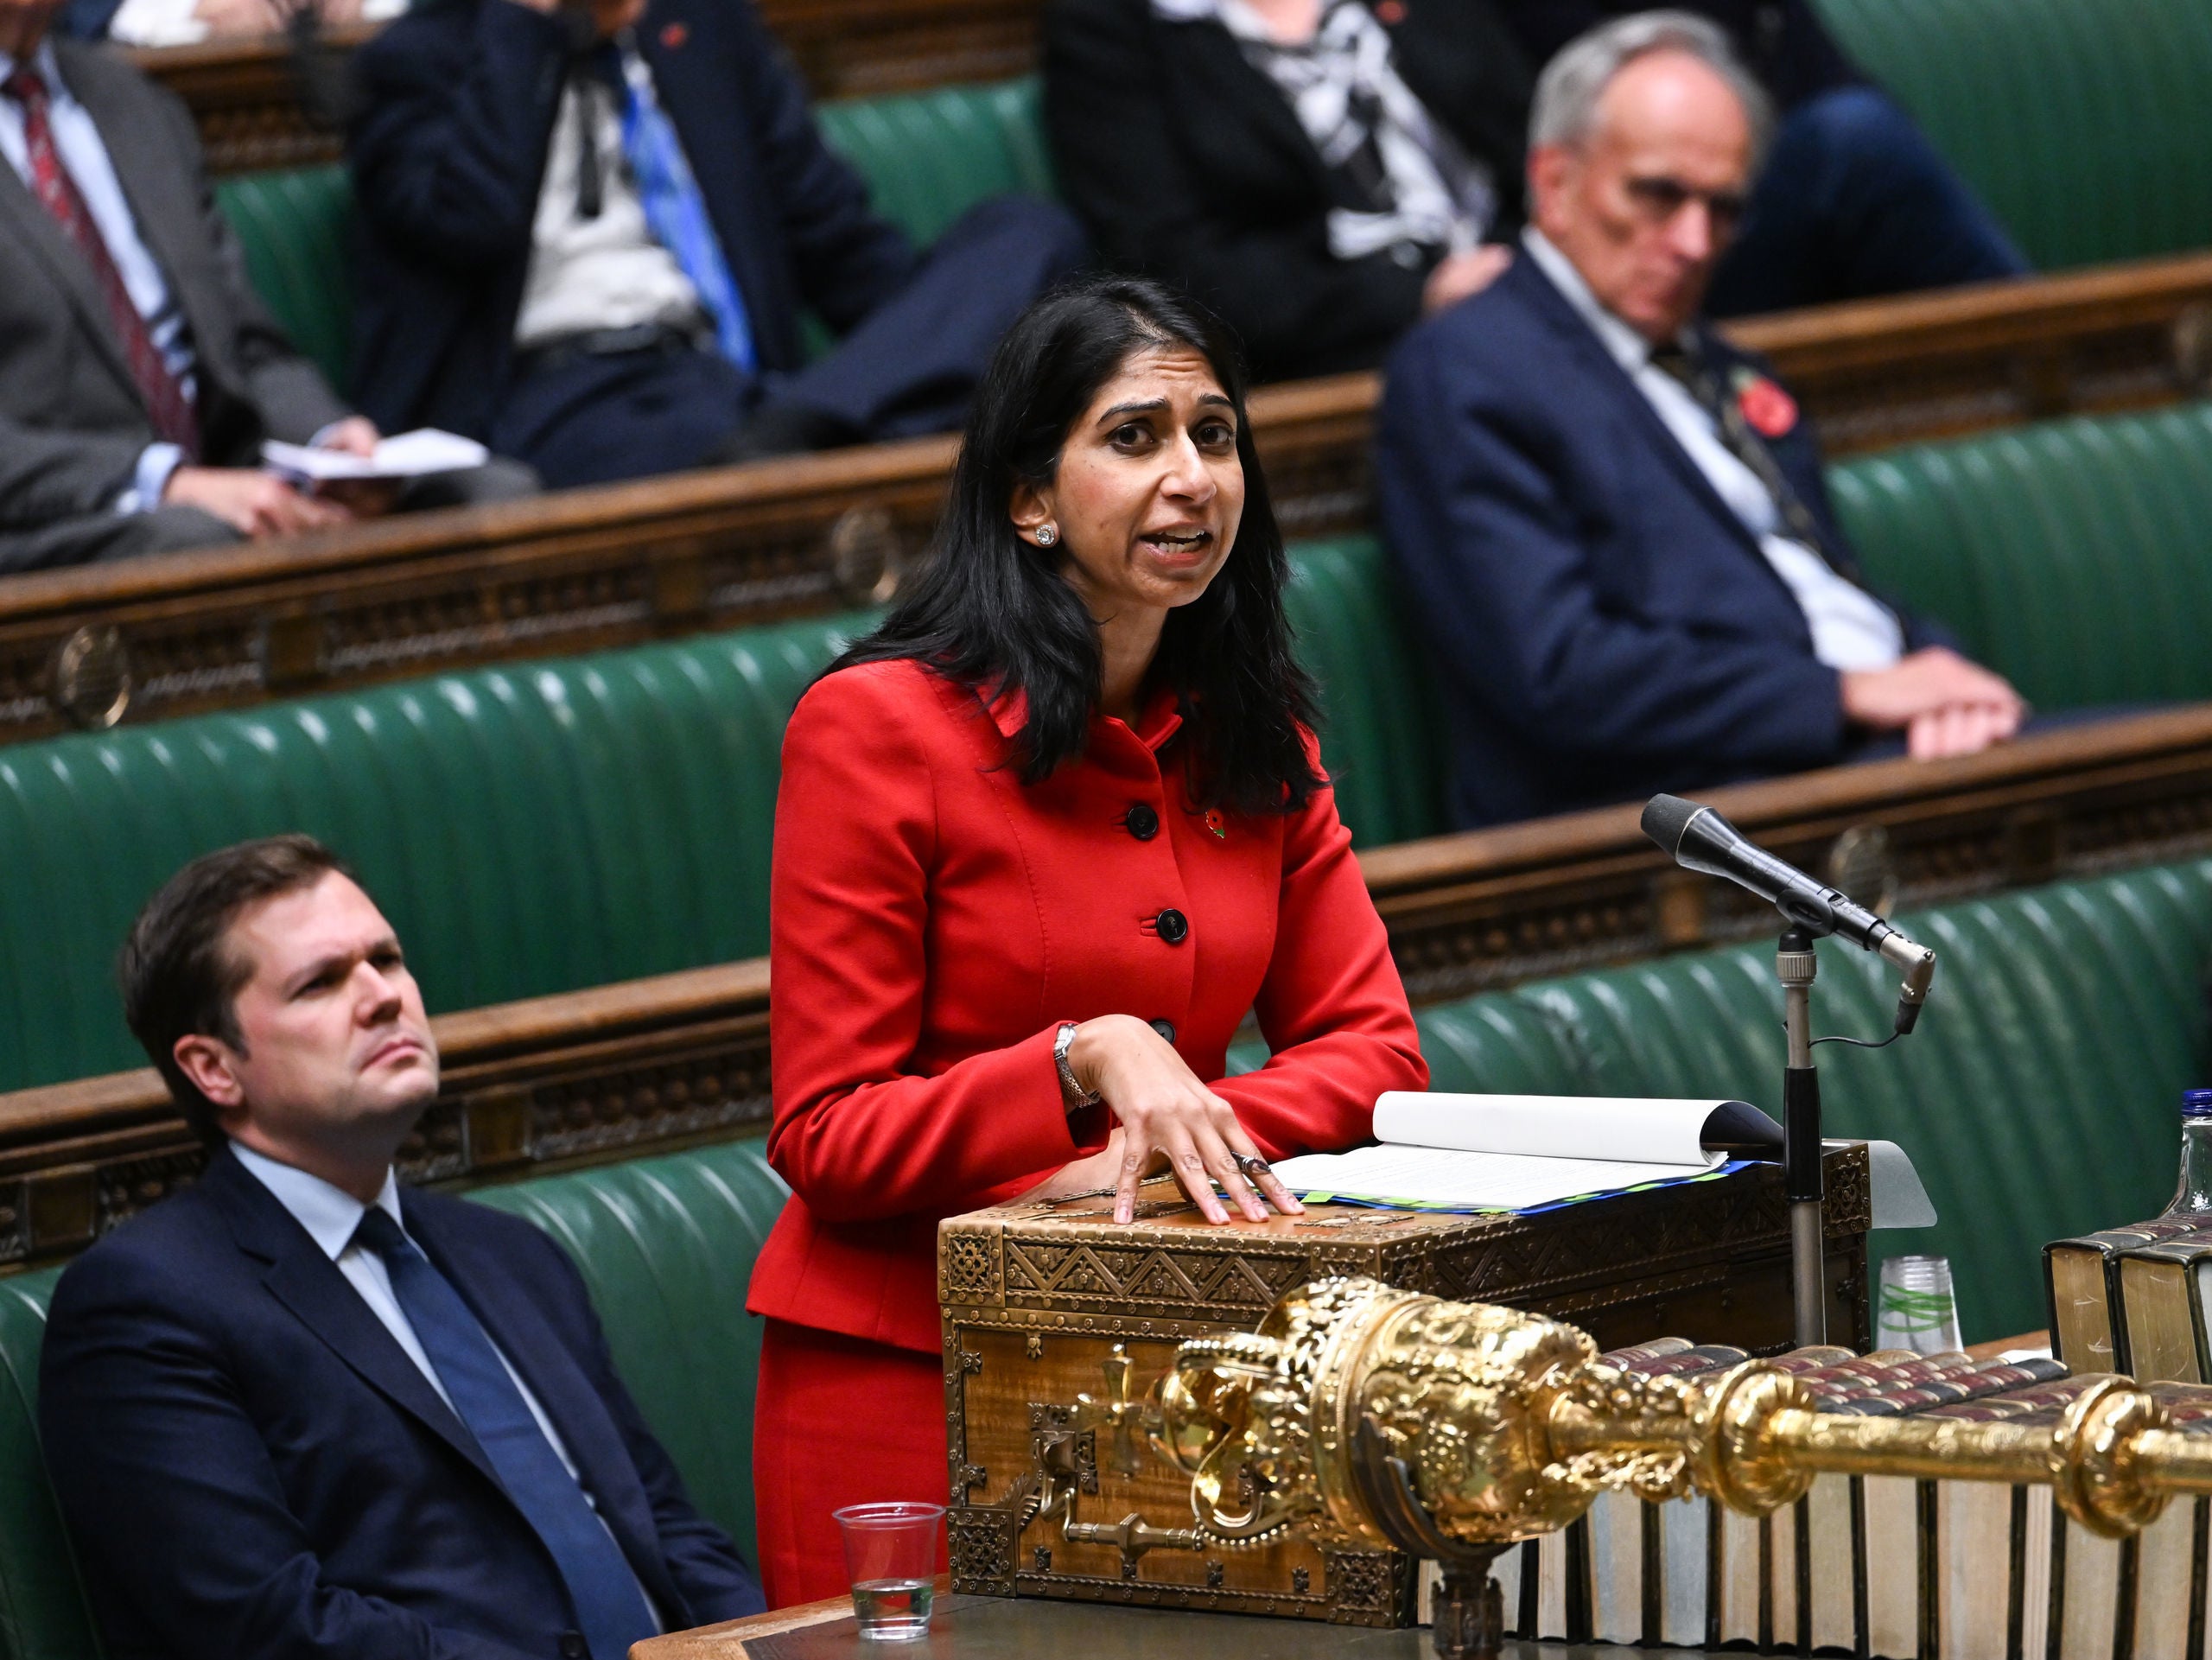 Suella Braverman managed to avoid going ‘full tofu’ in the Commons on Monday